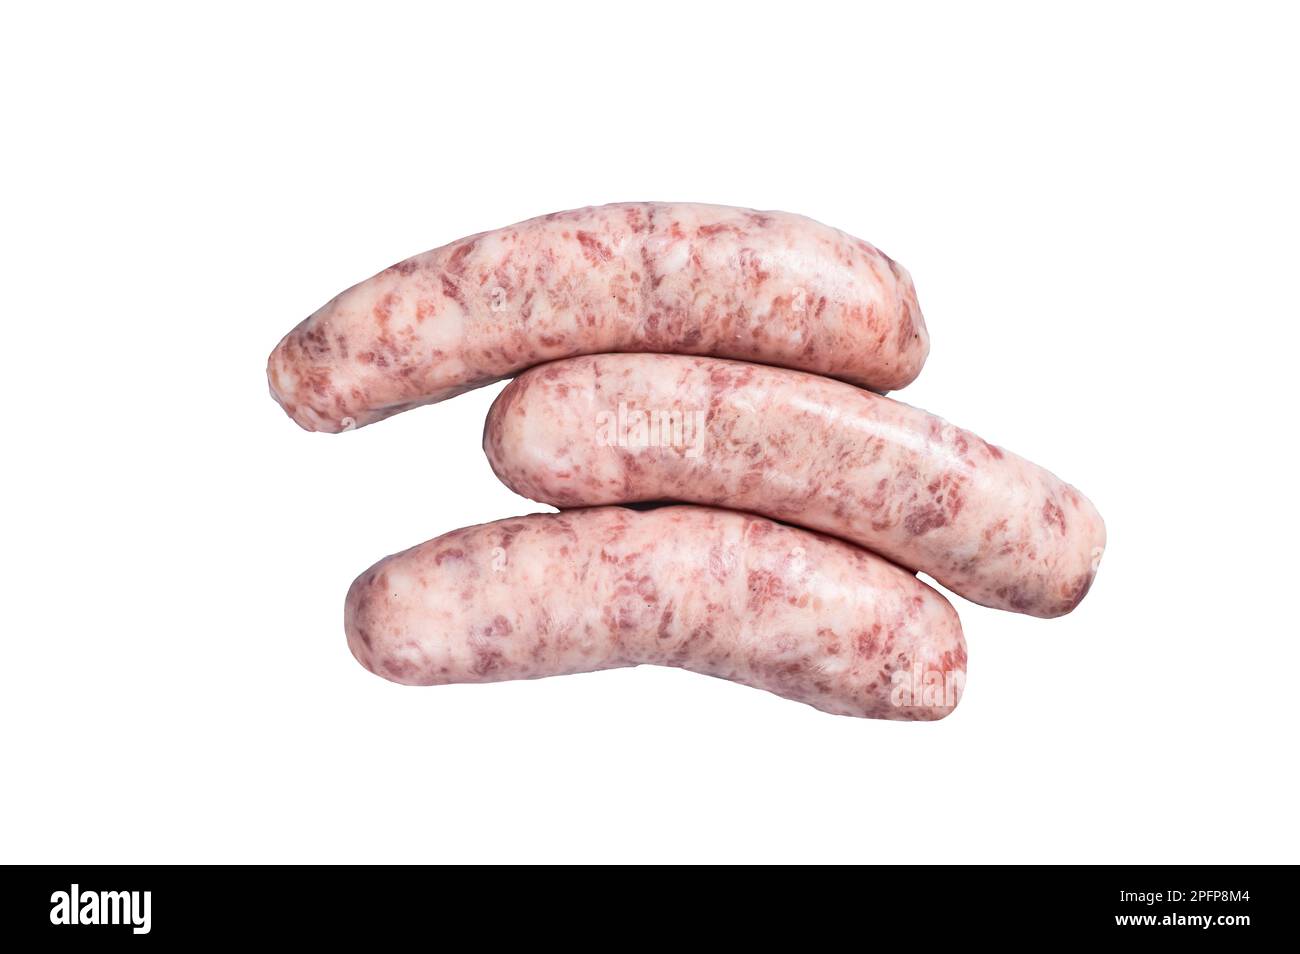 Raw Bratwurst sausages for BBQ with spices. Isolated on white background Stock Photo